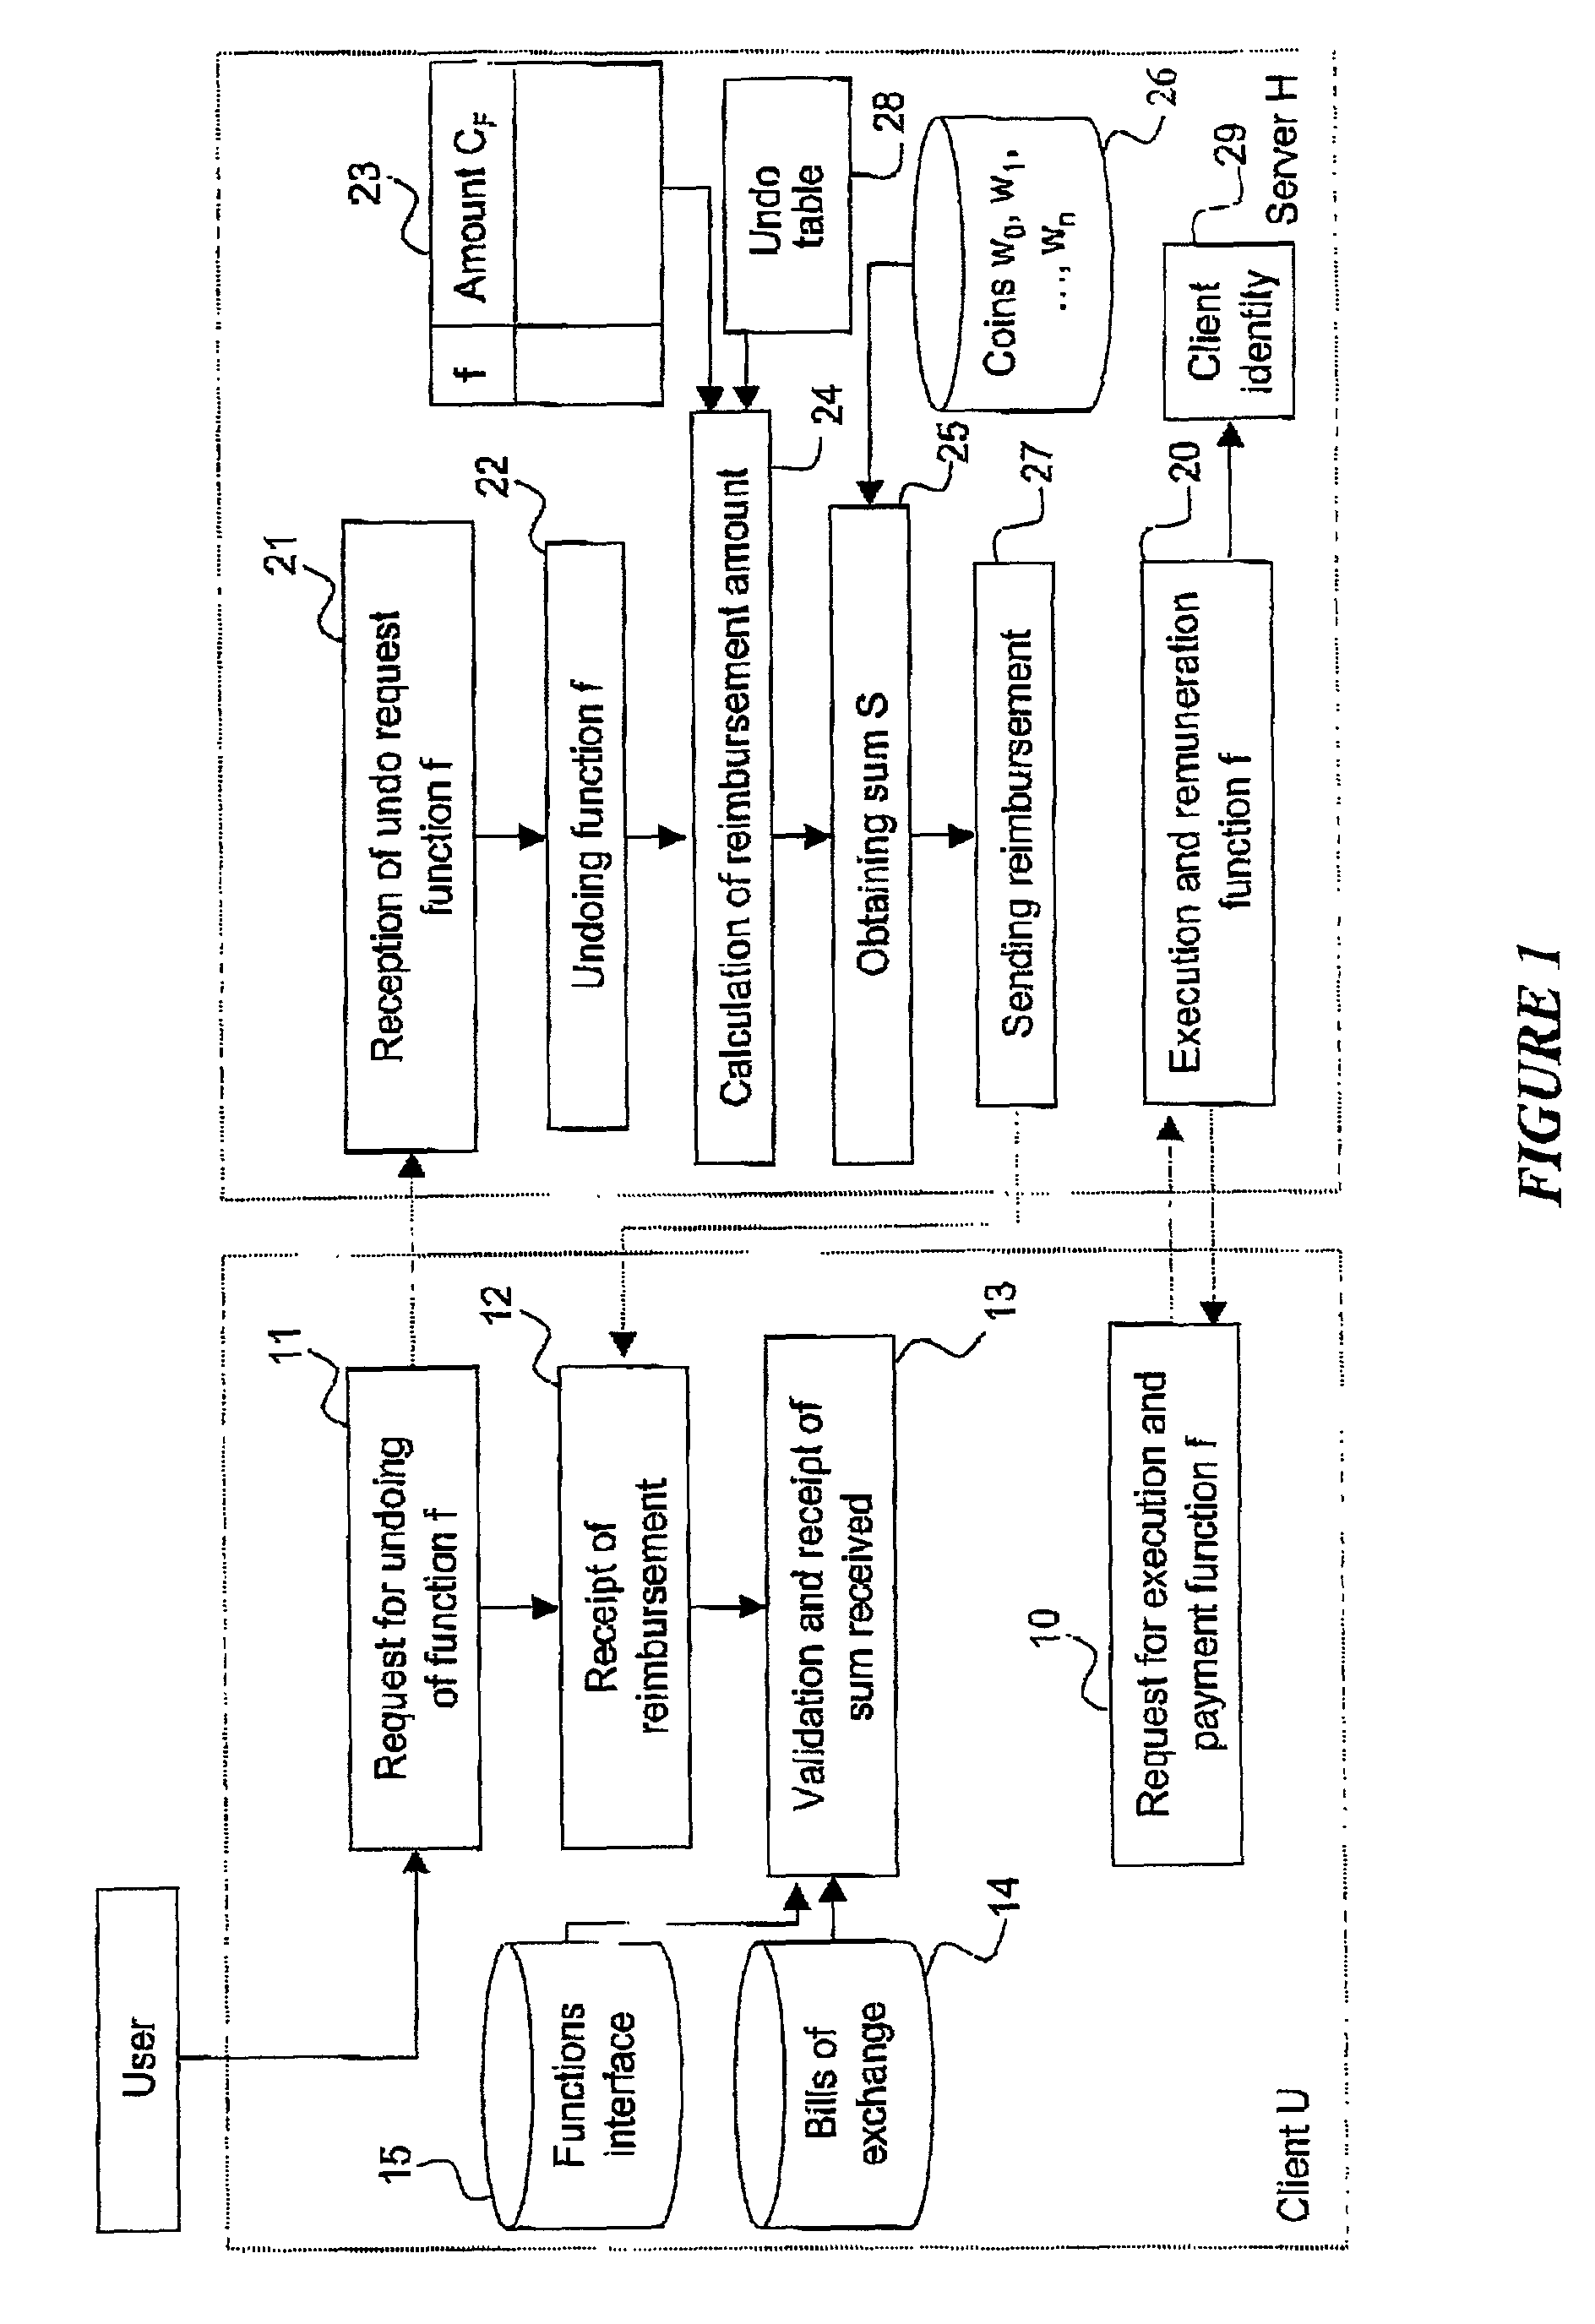 Method of undoing an operation remotely executed on a server station